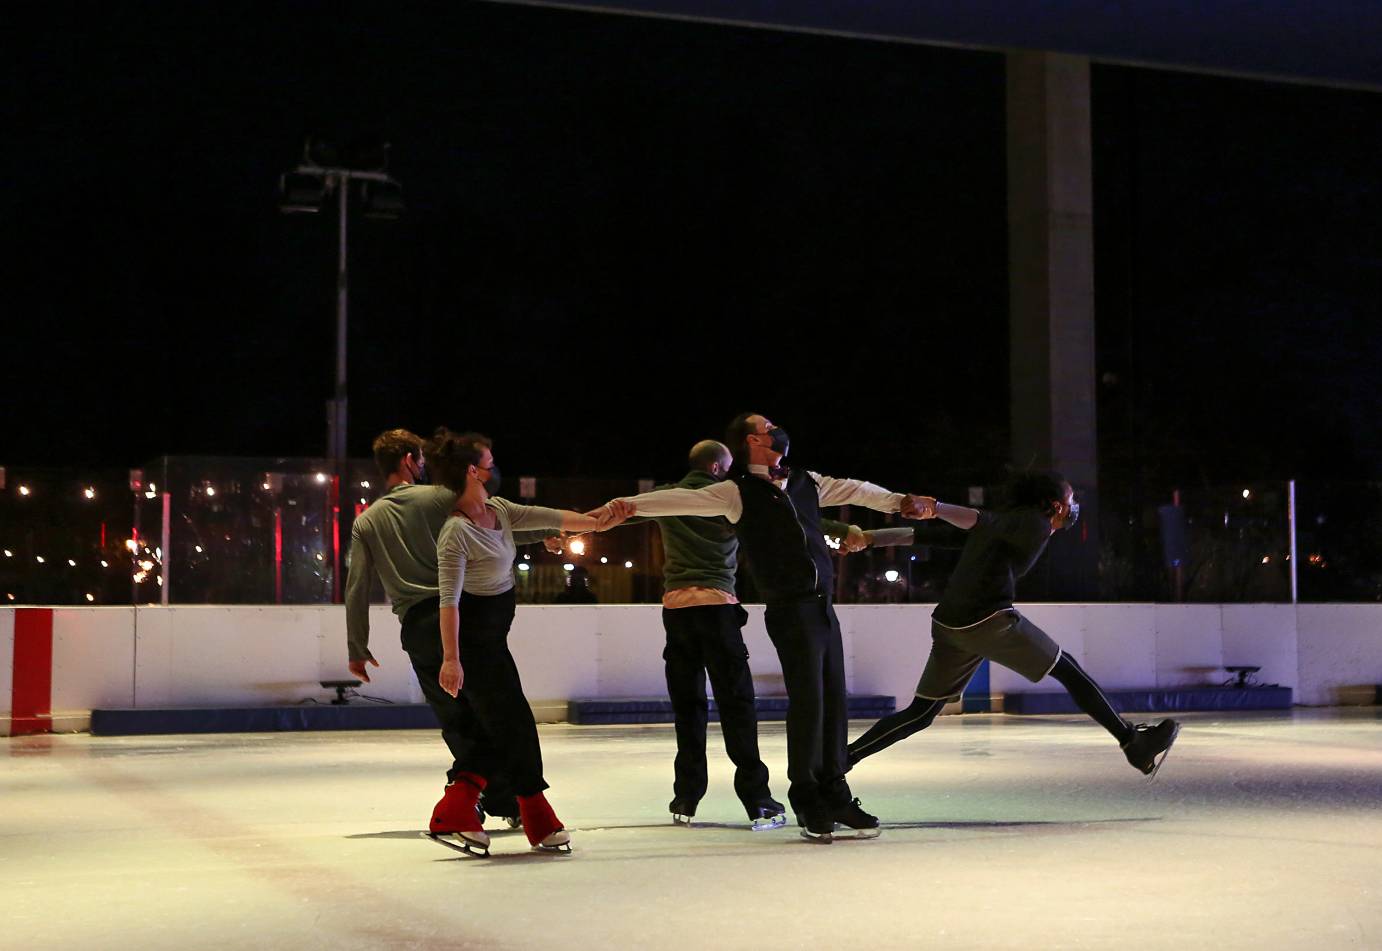 Five skaters hold hands to create a loose circle as one tries to break free